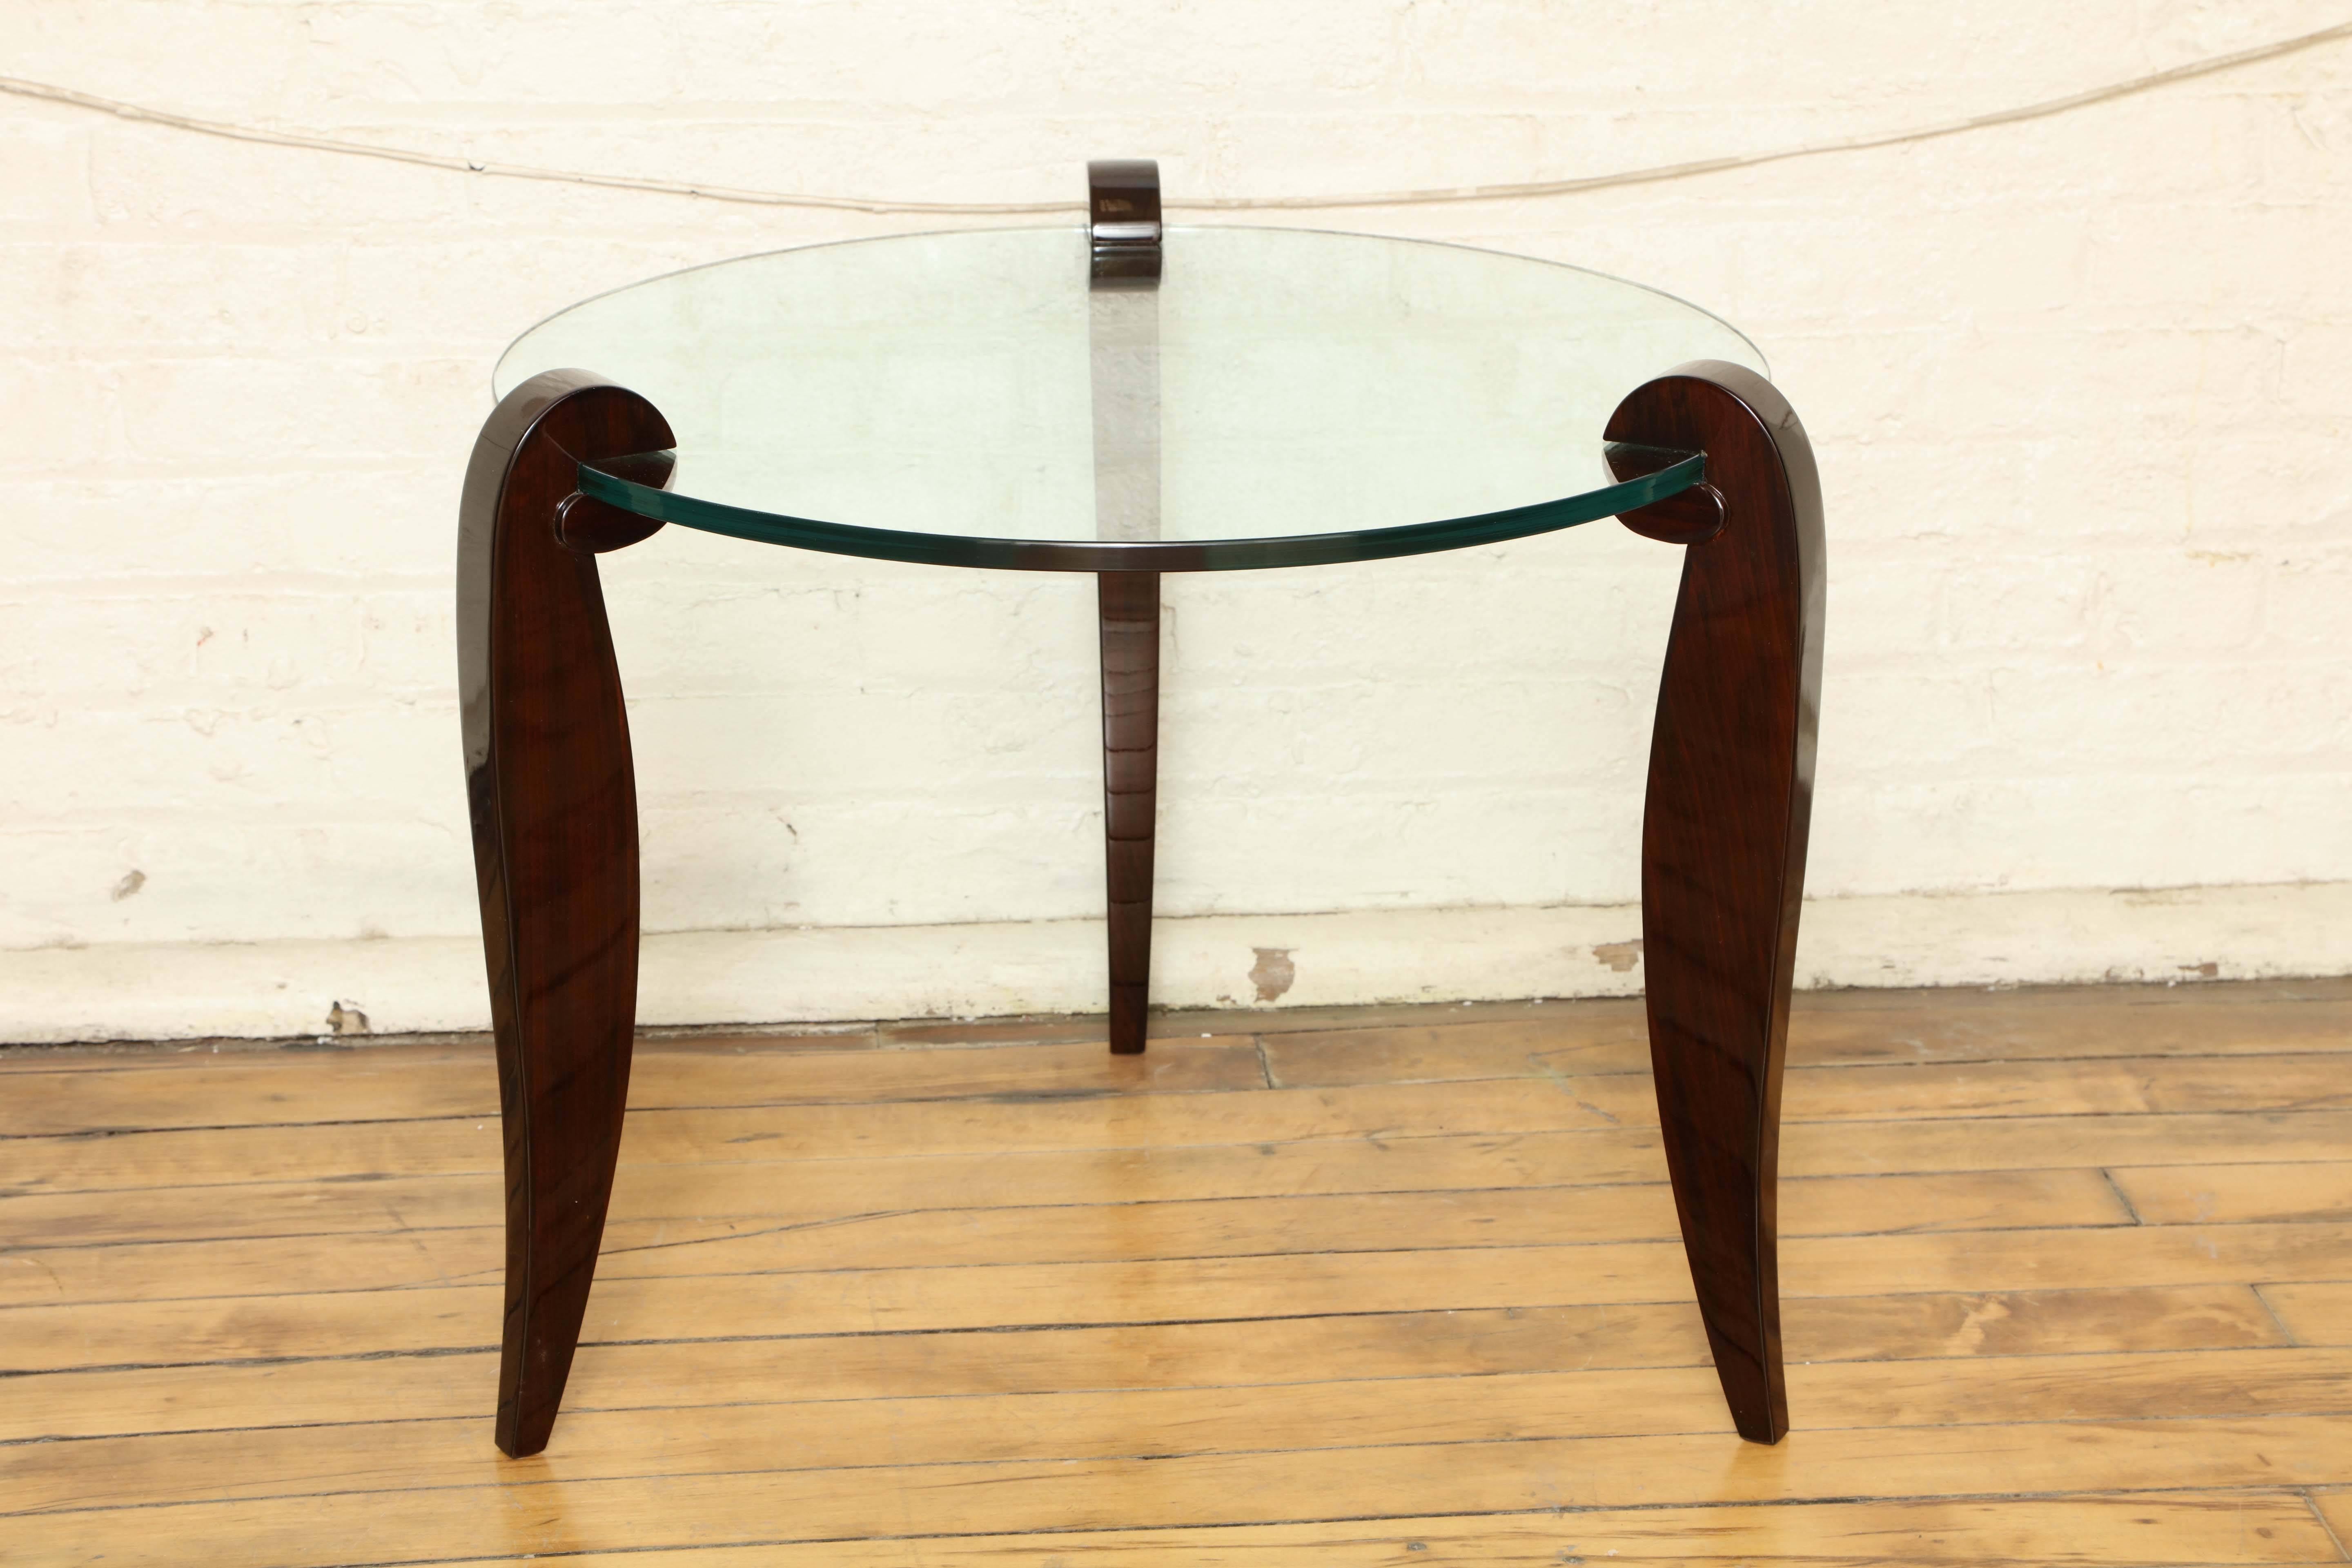 Chic Art Deco gueridon with glass top and Rio palissandre curved legs.